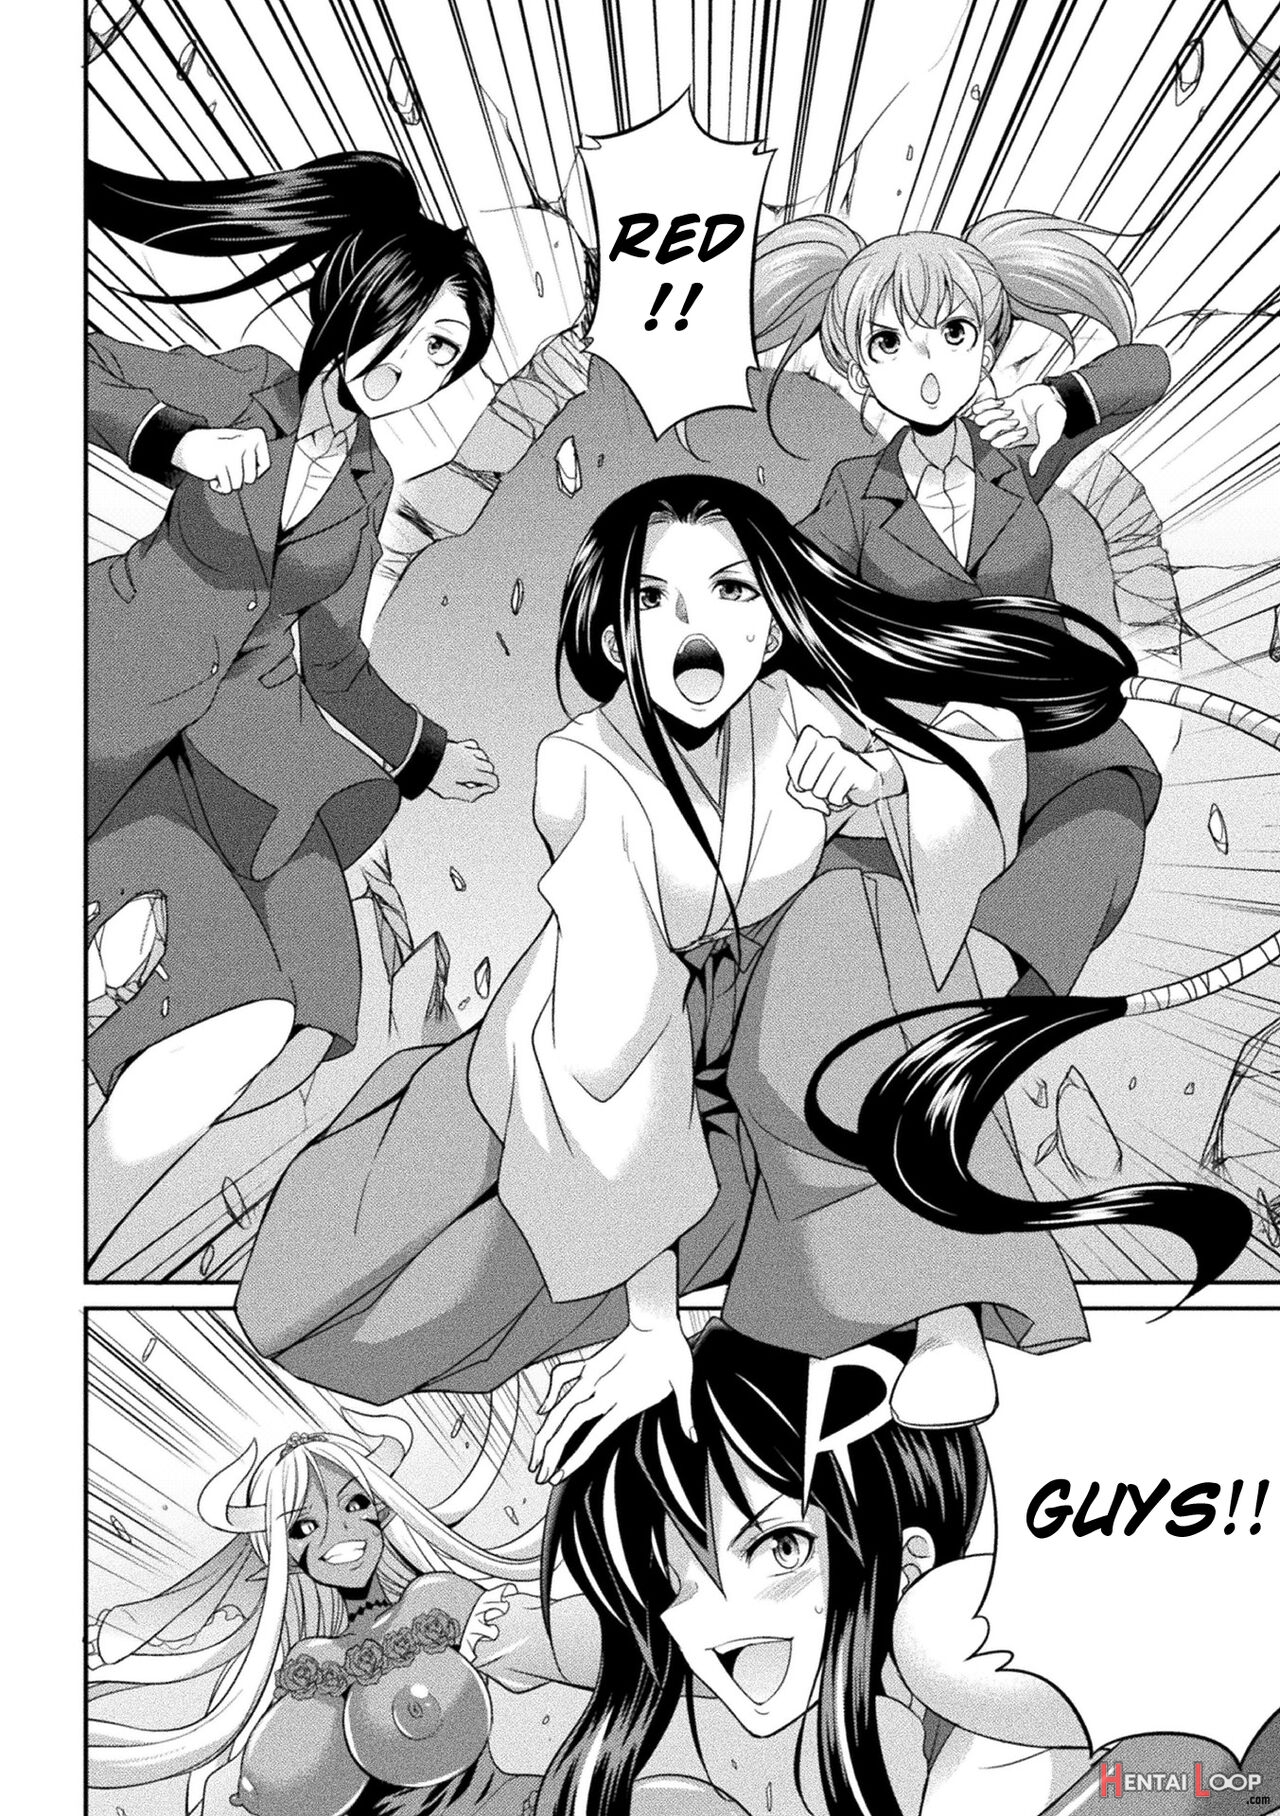 Special Duty Squadron Colorful Force Heroines Of Justice Vs The Tentacle Queen! The Great Battle Of Futa Training!? page 137